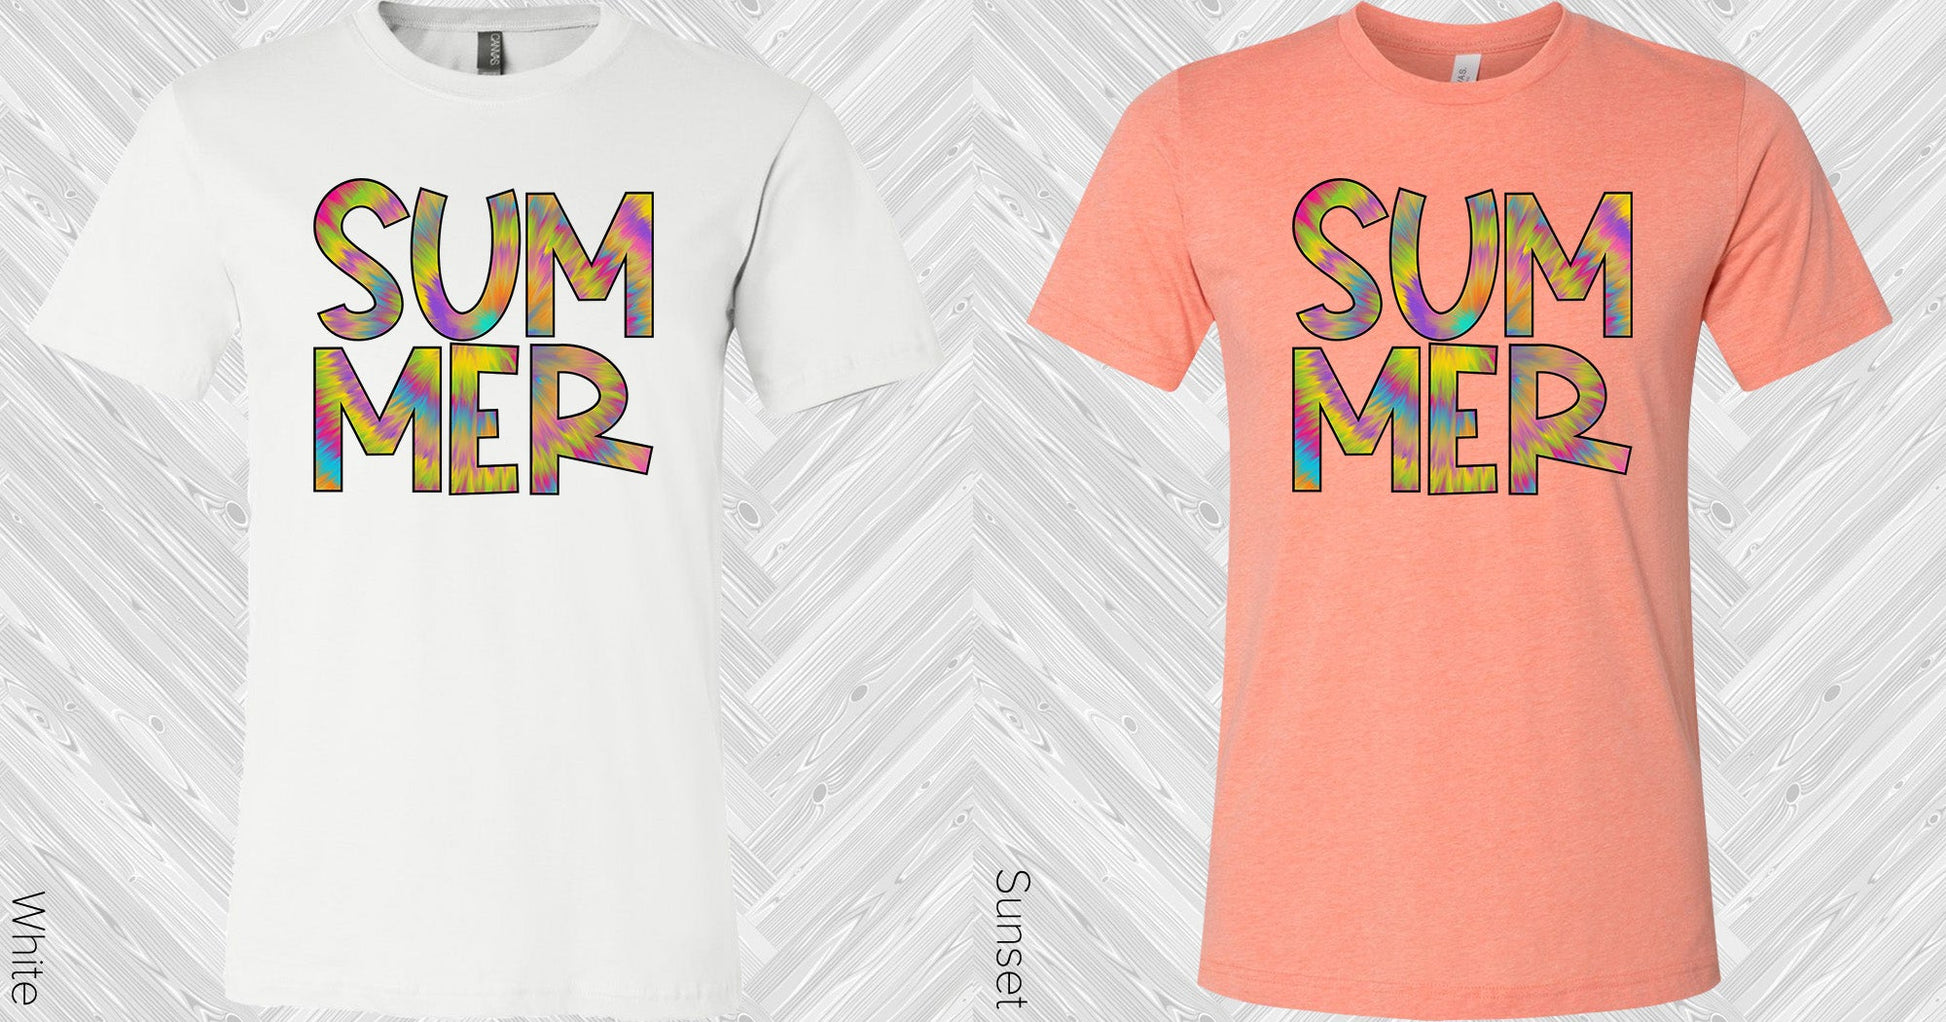 Summer Graphic Tee Graphic Tee